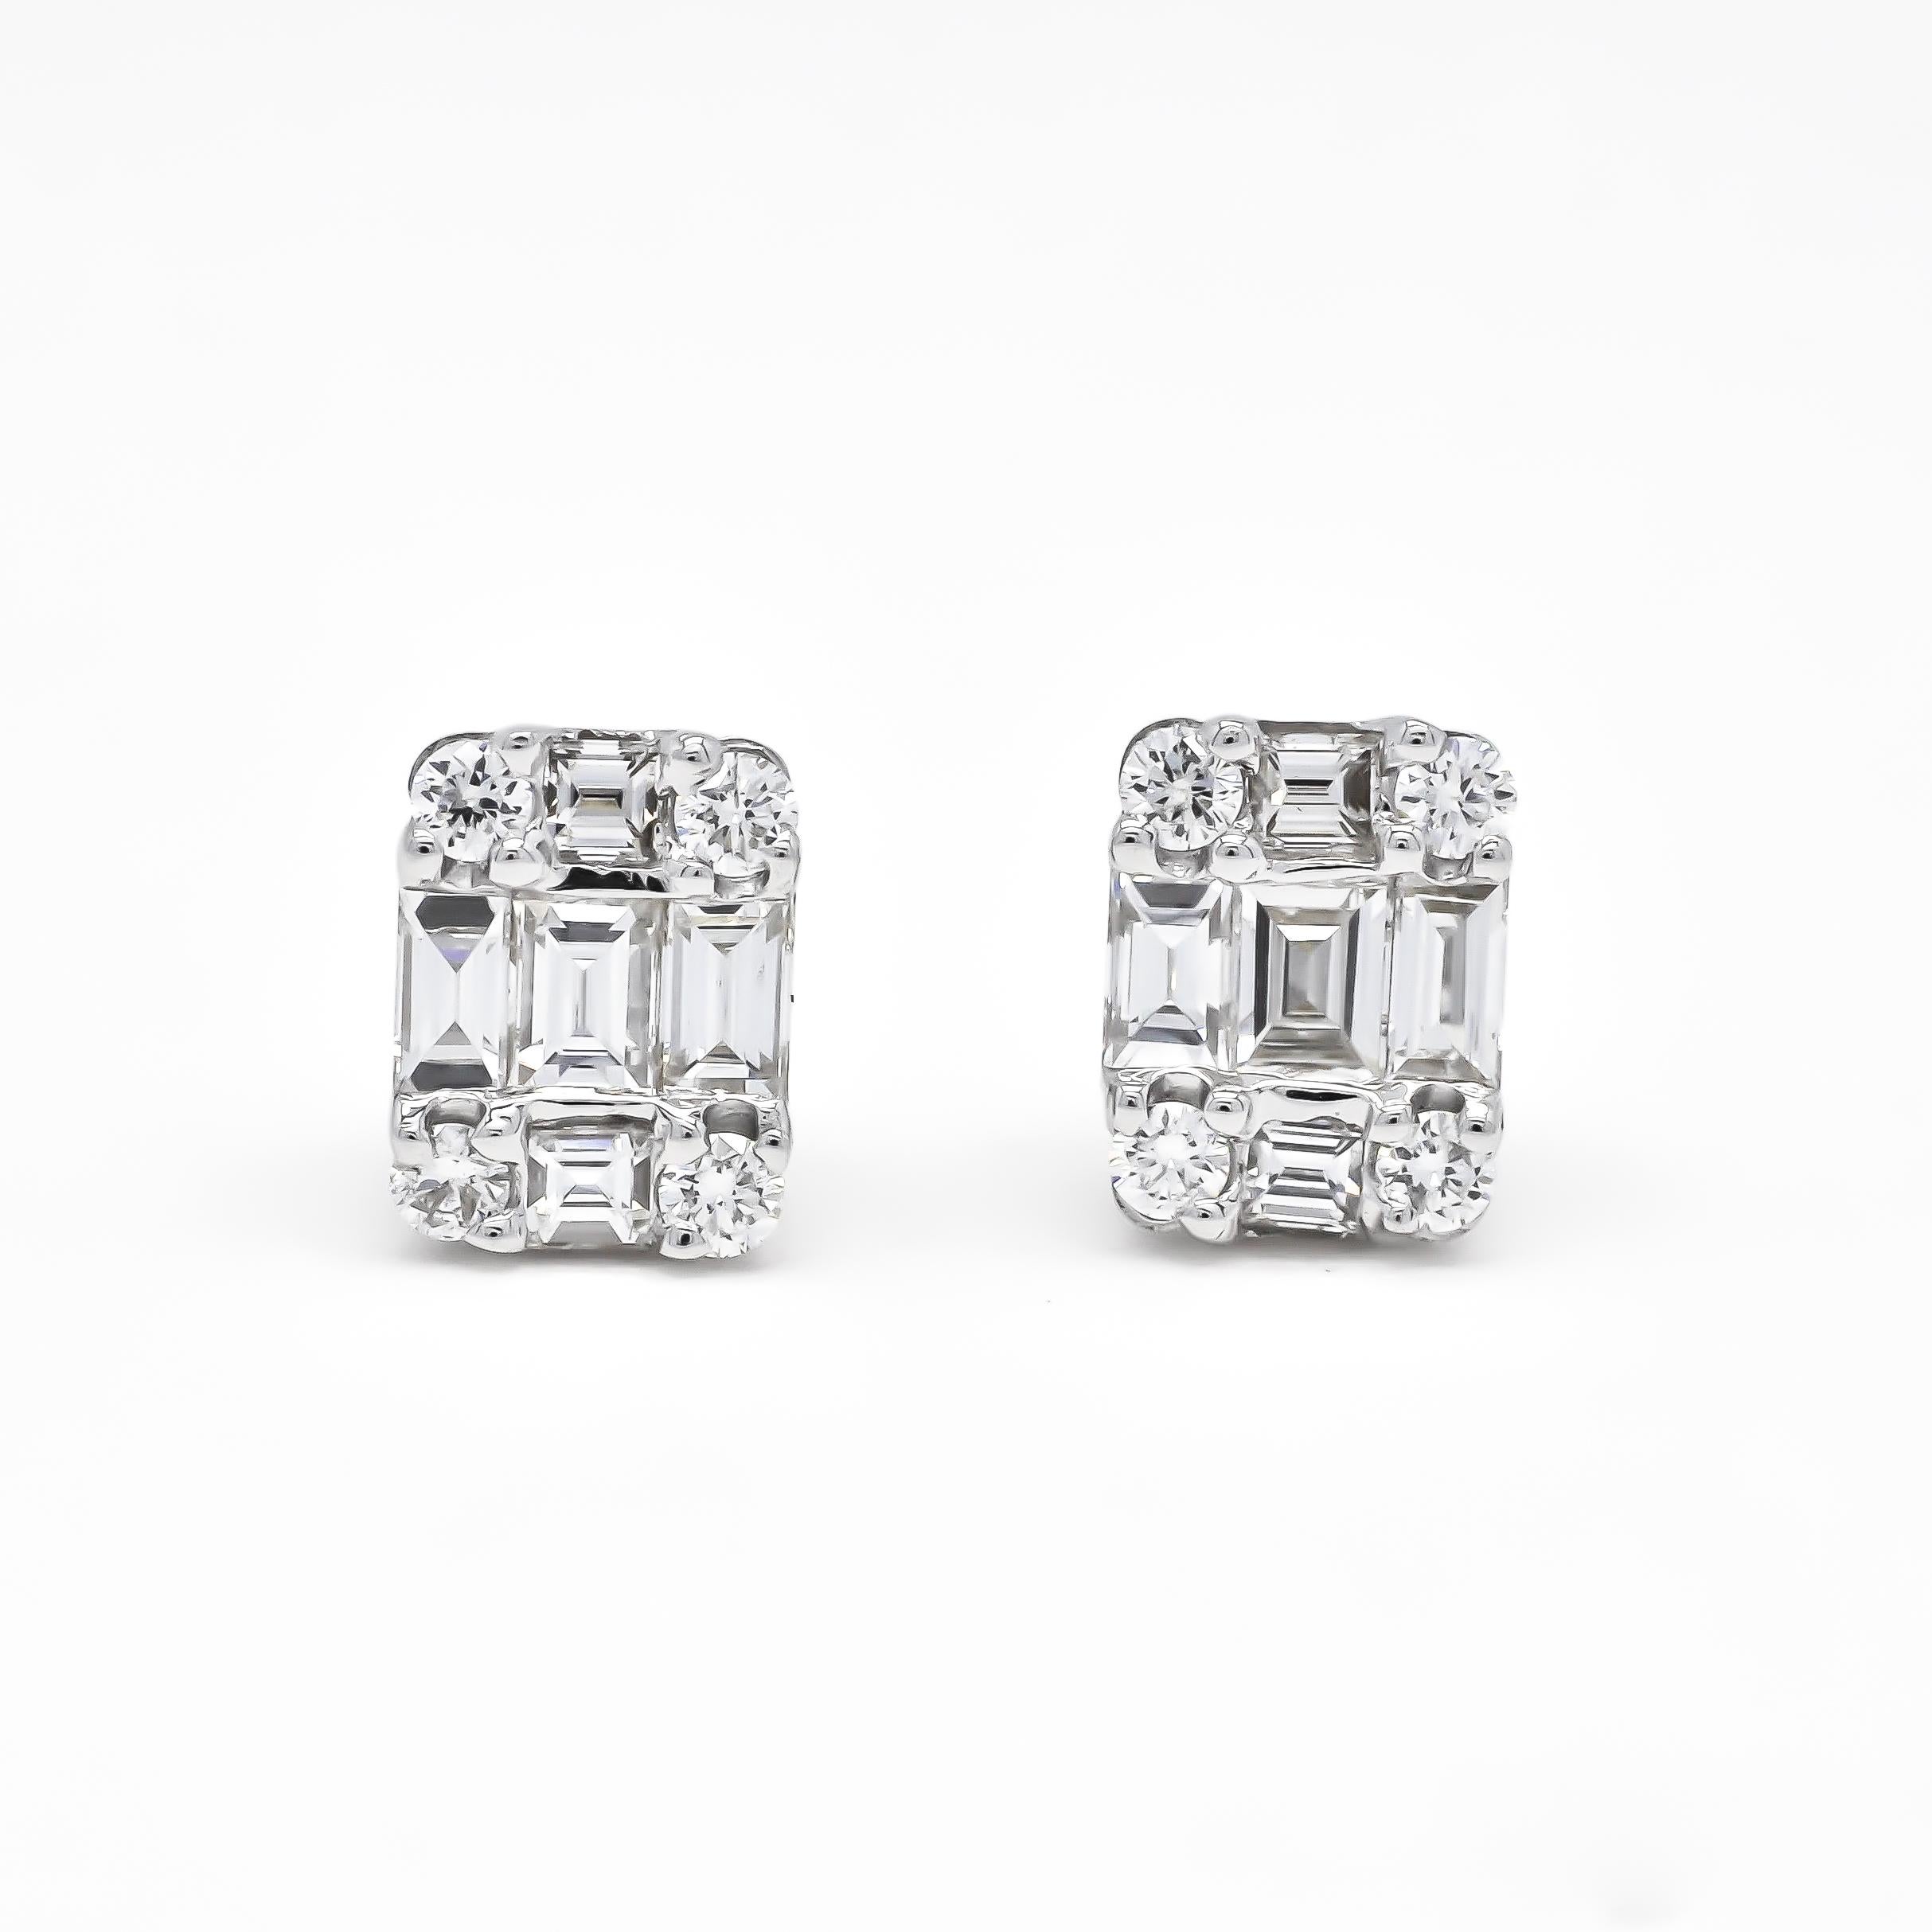 Elevate your jewelry collection with our exquisite Natural Baguette 0.80 ct. Diamond Square Cluster 18KT White Gold Stud Earrings, the epitome of elegance and ethical luxury. Crafted with the utmost care, these earrings feature natural, ethically